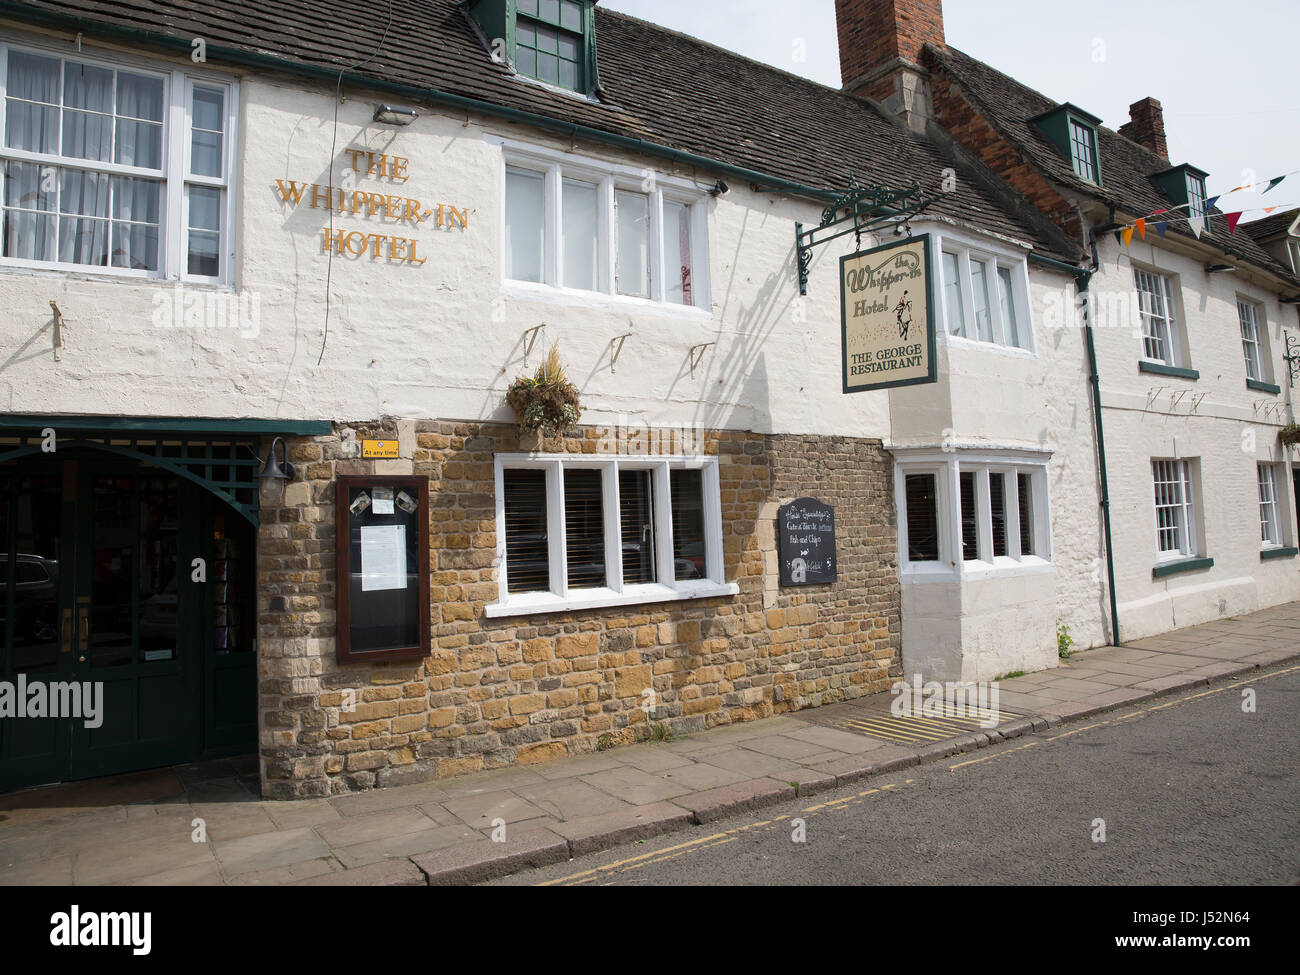 The Whipper in Hotel in Oakham Stock Photo